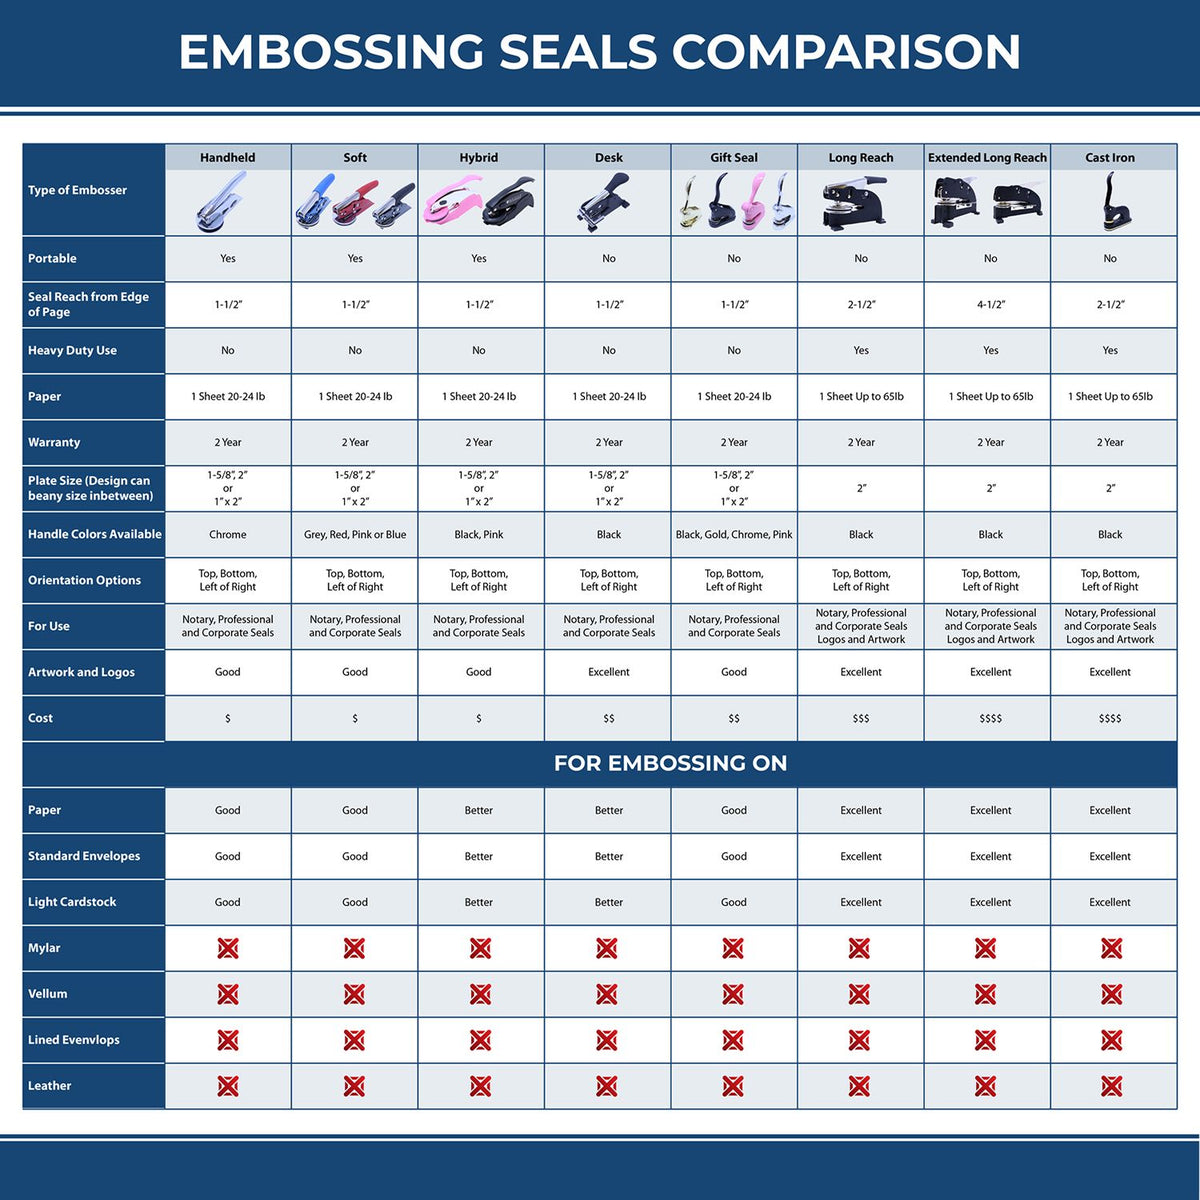 A comparison chart for the different types of mount models available for the Heavy Duty Cast Iron Georgia Land Surveyor Seal Embosser.